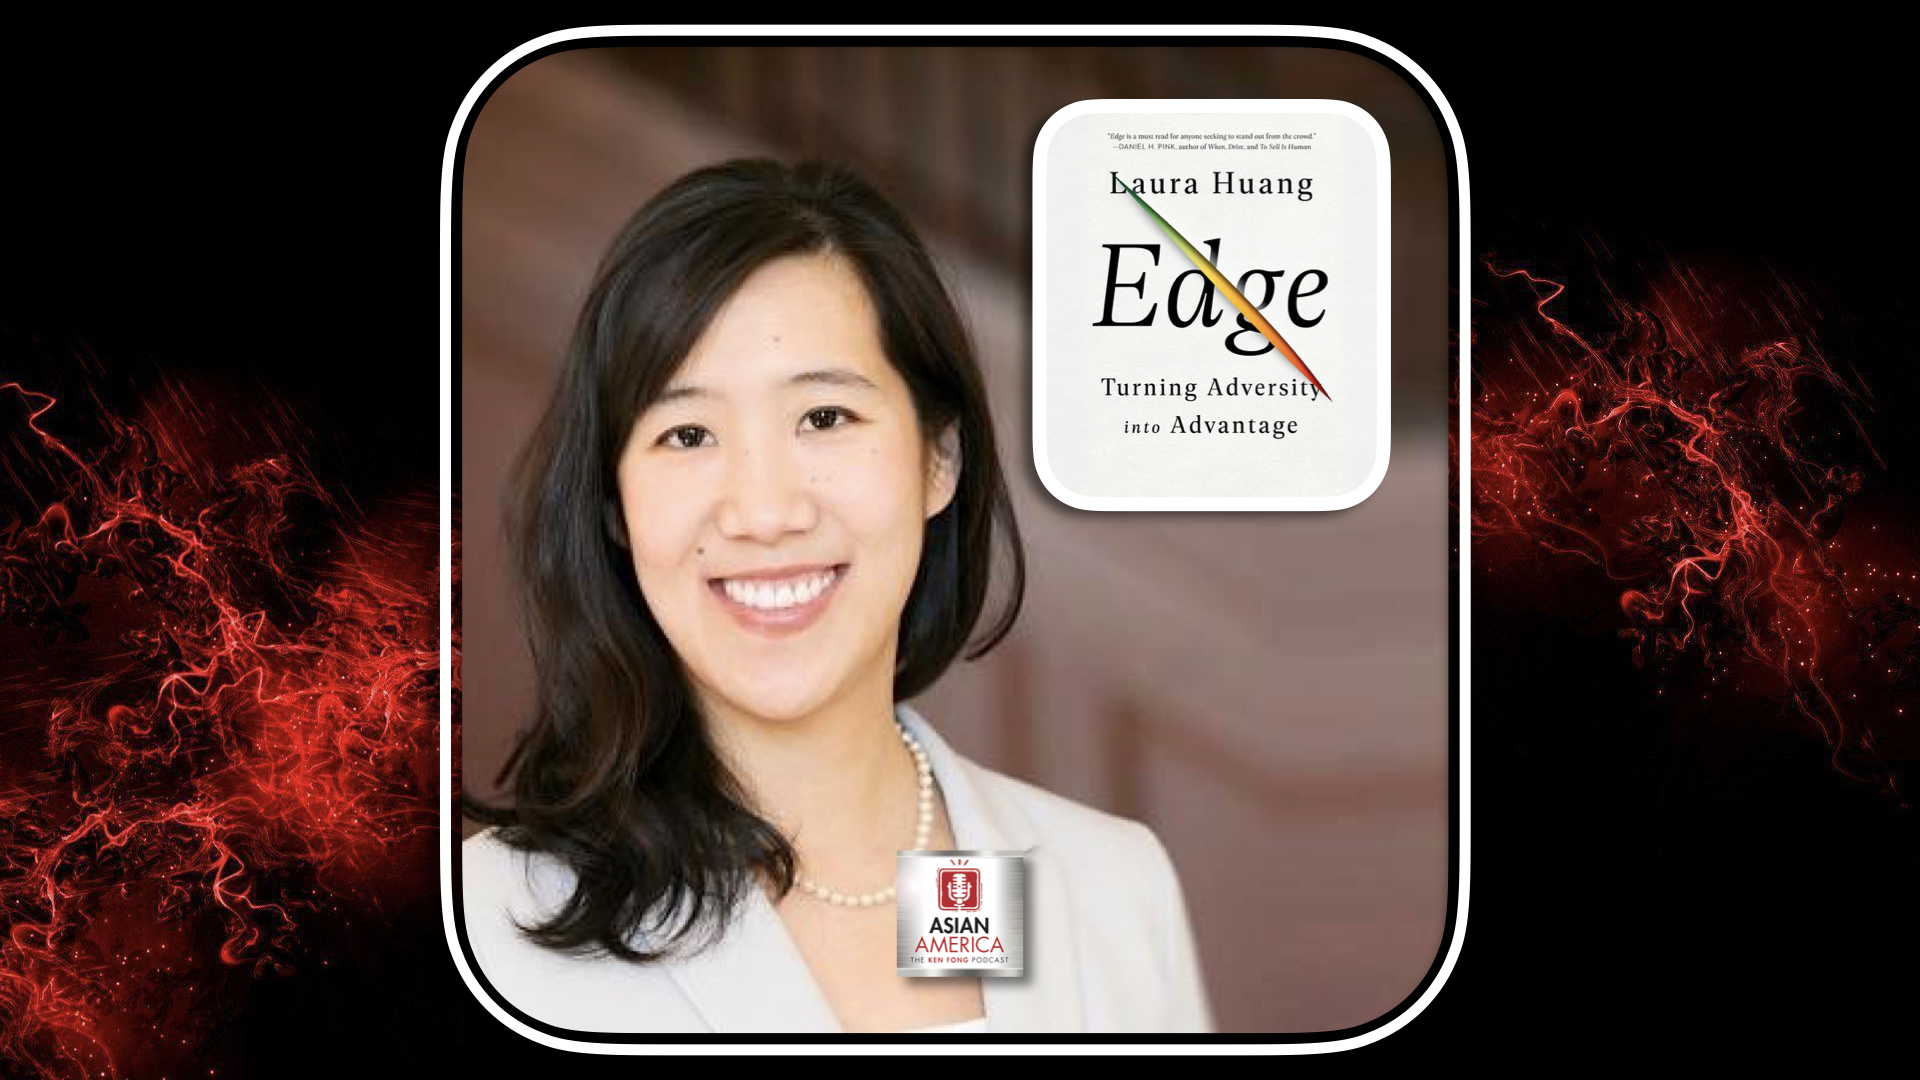 Ep 284: Dr. Laura Huang